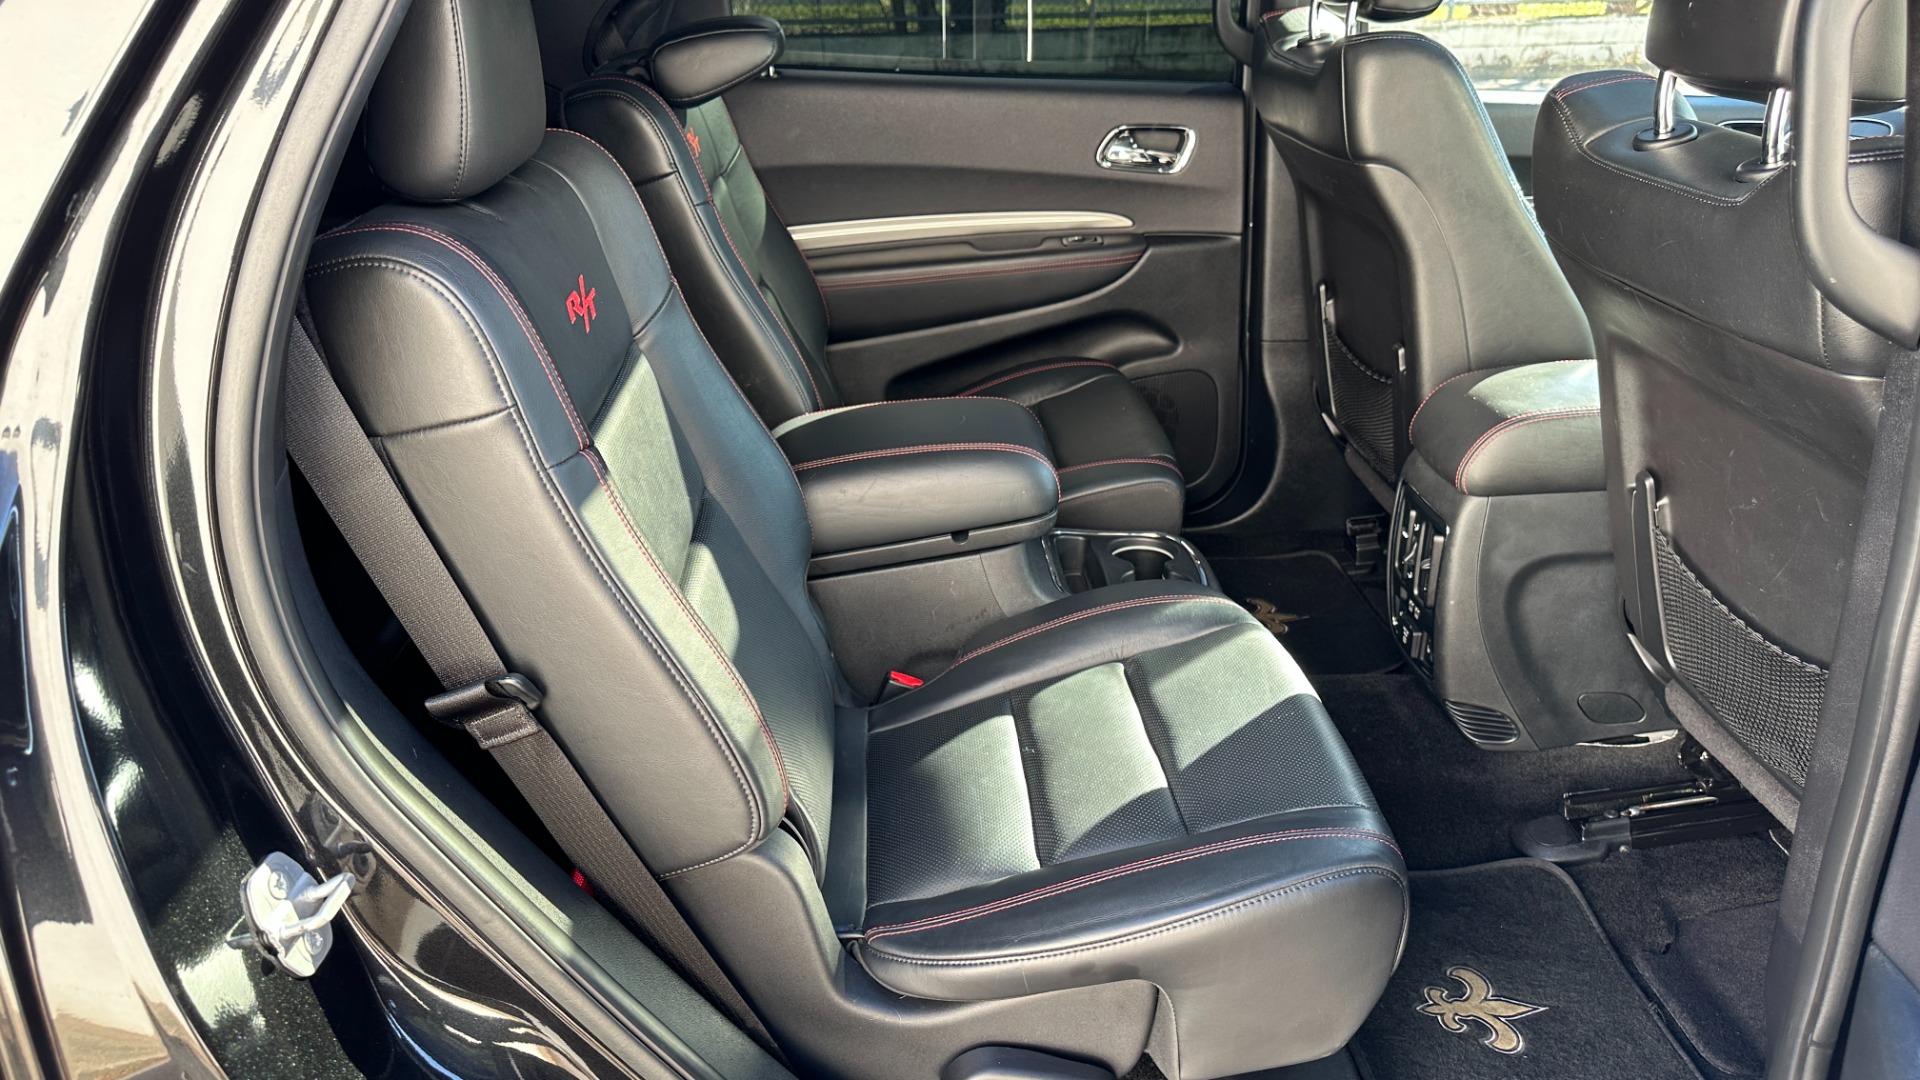 Used 2015 Dodge Durango R/T / HEMI V8 / CAPTAINS CHAIRS / 3 ROW SEATING / TECH PKG / NAPPA LEATHER  for sale $23,995 at Formula Imports in Charlotte NC 28227 34